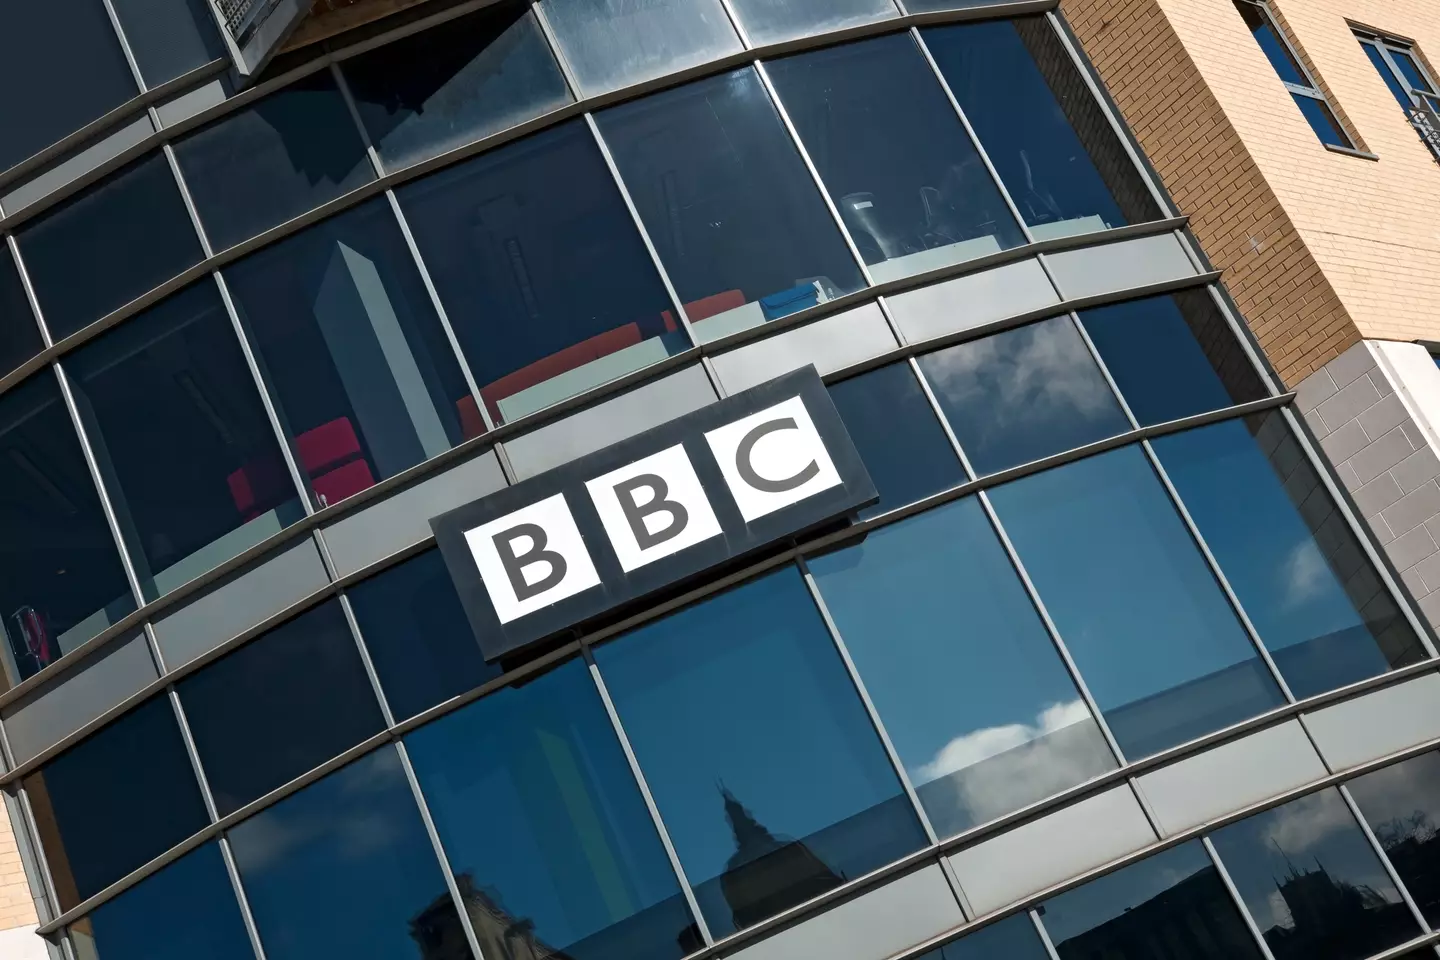 It comes after the parents of another person made allegations against the same BBC presenter.